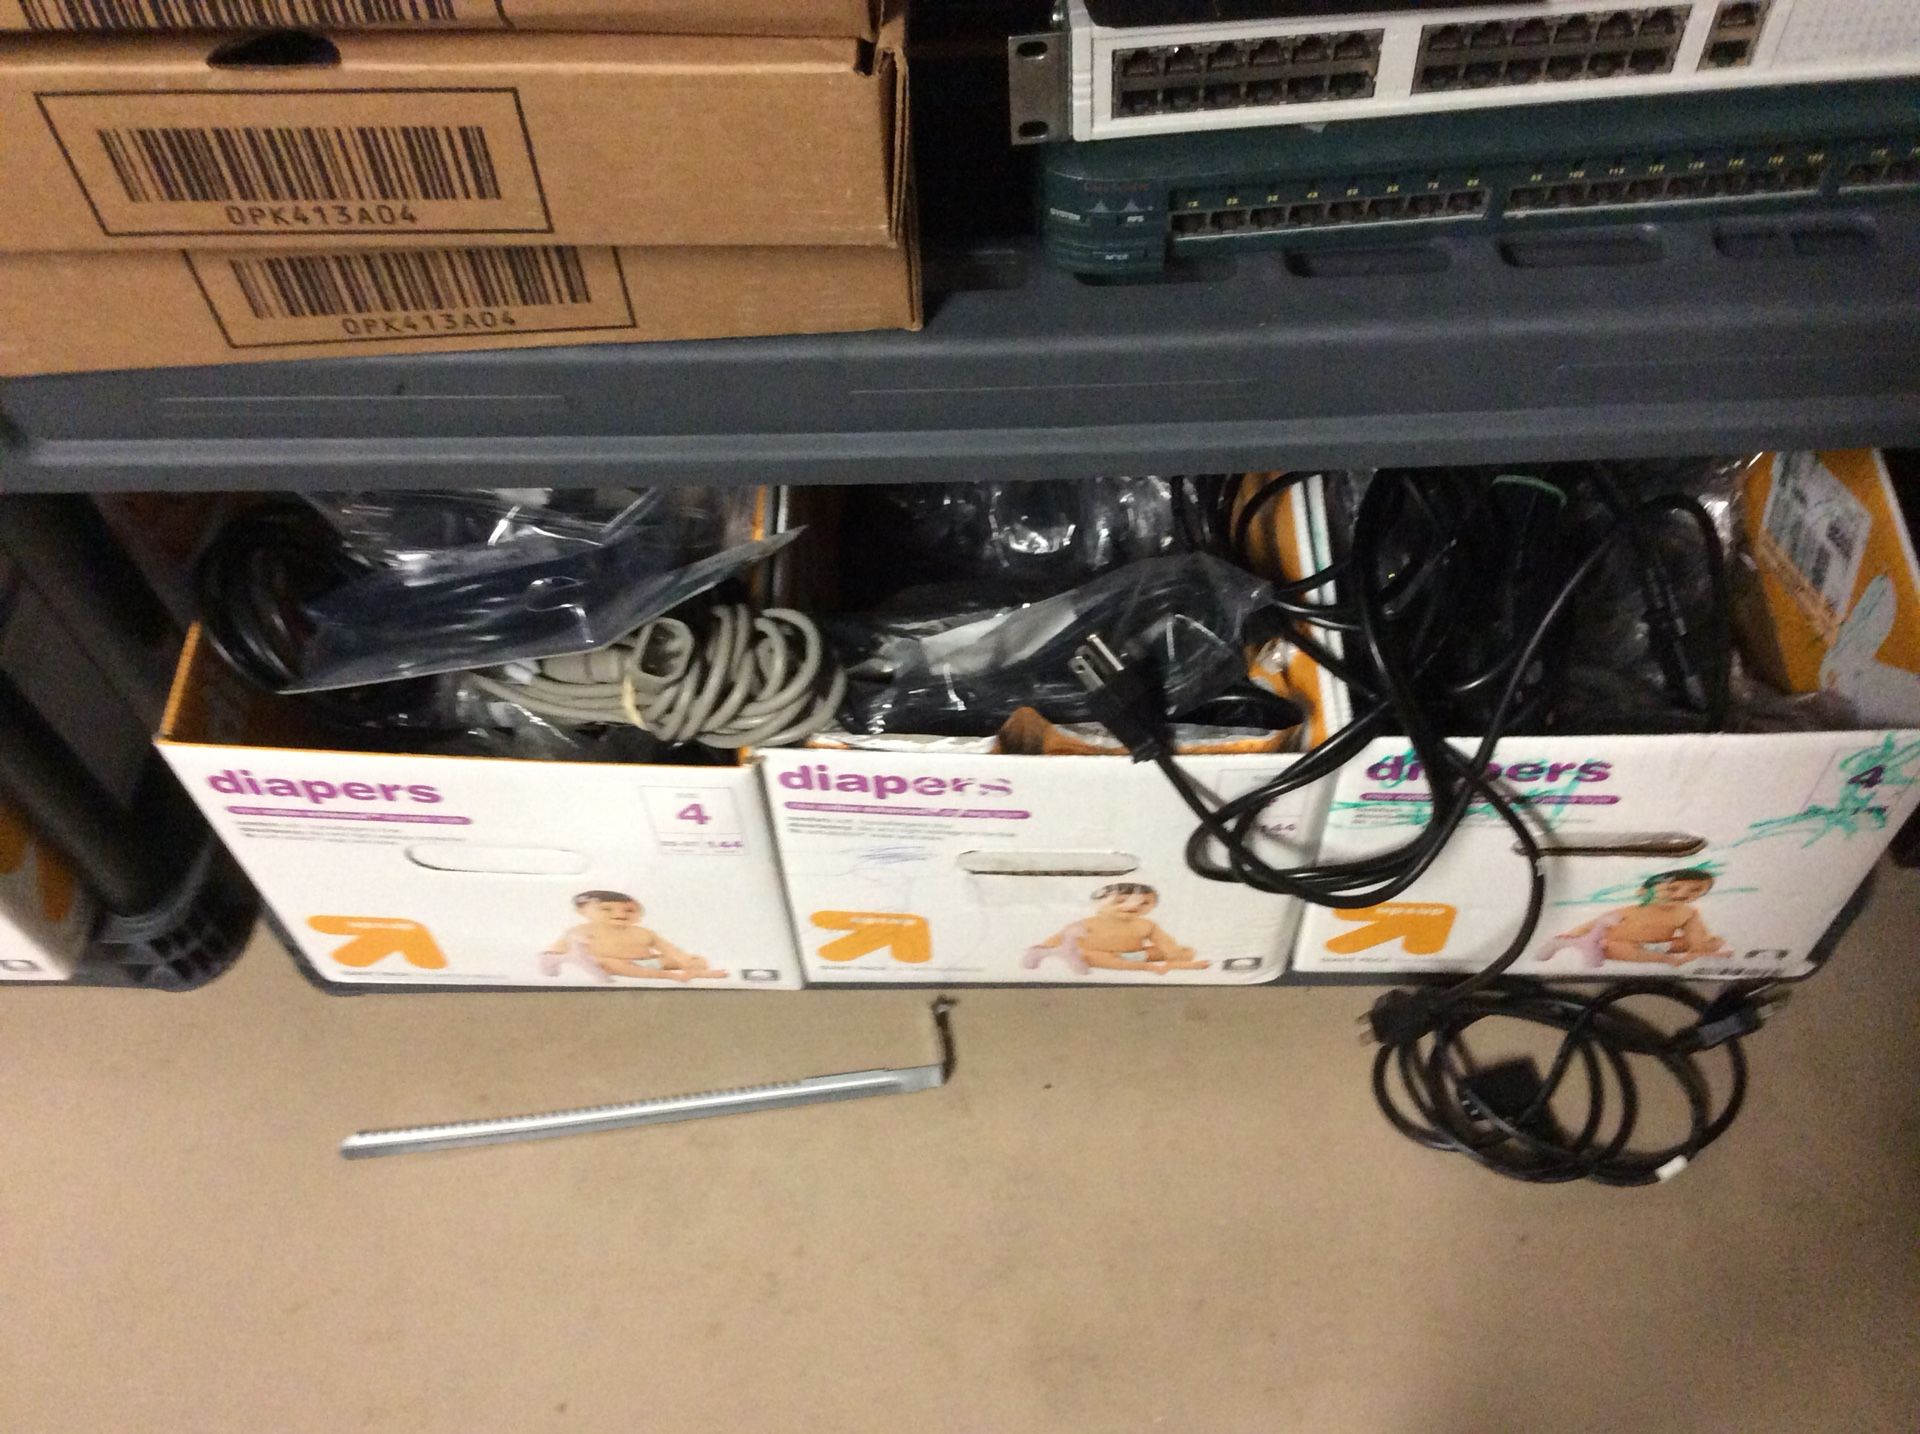 Lot of computer parts and cables